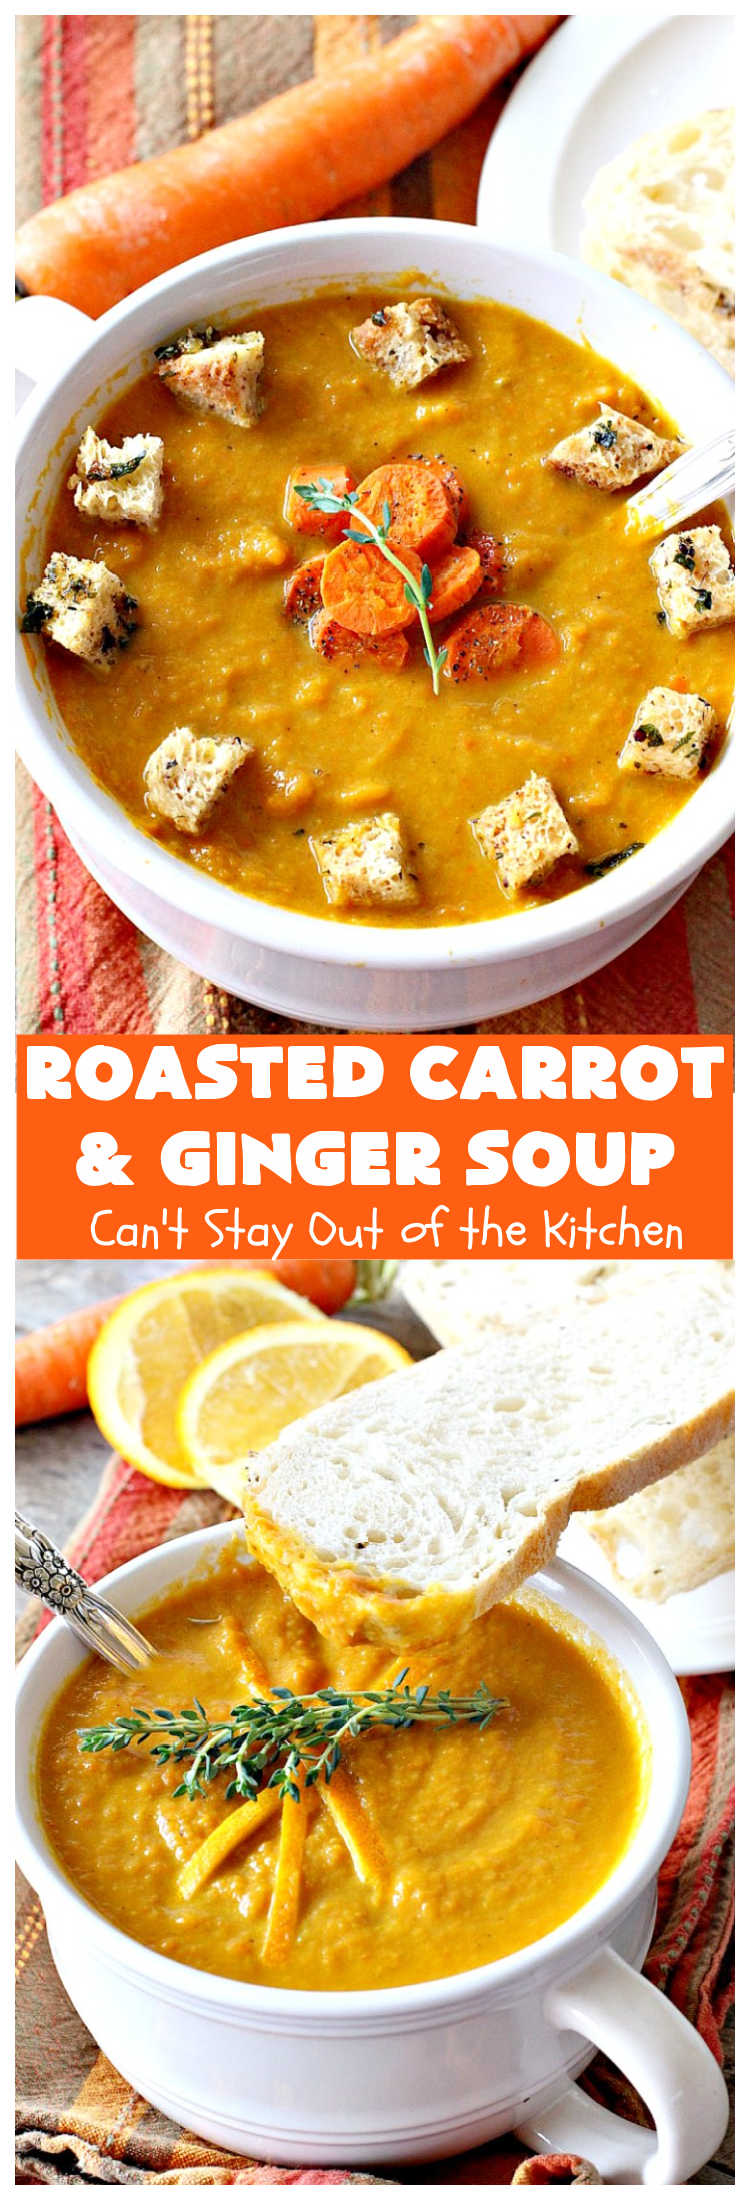 Roasted Carrot and Ginger Soup | Can't Stay Out of the Kitchen | this lovely #soup is creamy & delicious & perfect for cold, winter nights when you want comfort food. It's also #GlutenFree #vegan, #CleanEating & #LowCalorie. #carrots #ginger #leeks #MeatlessMondays #RoastedCarrotAndGingerSoup #CarrotAndGingerSoup